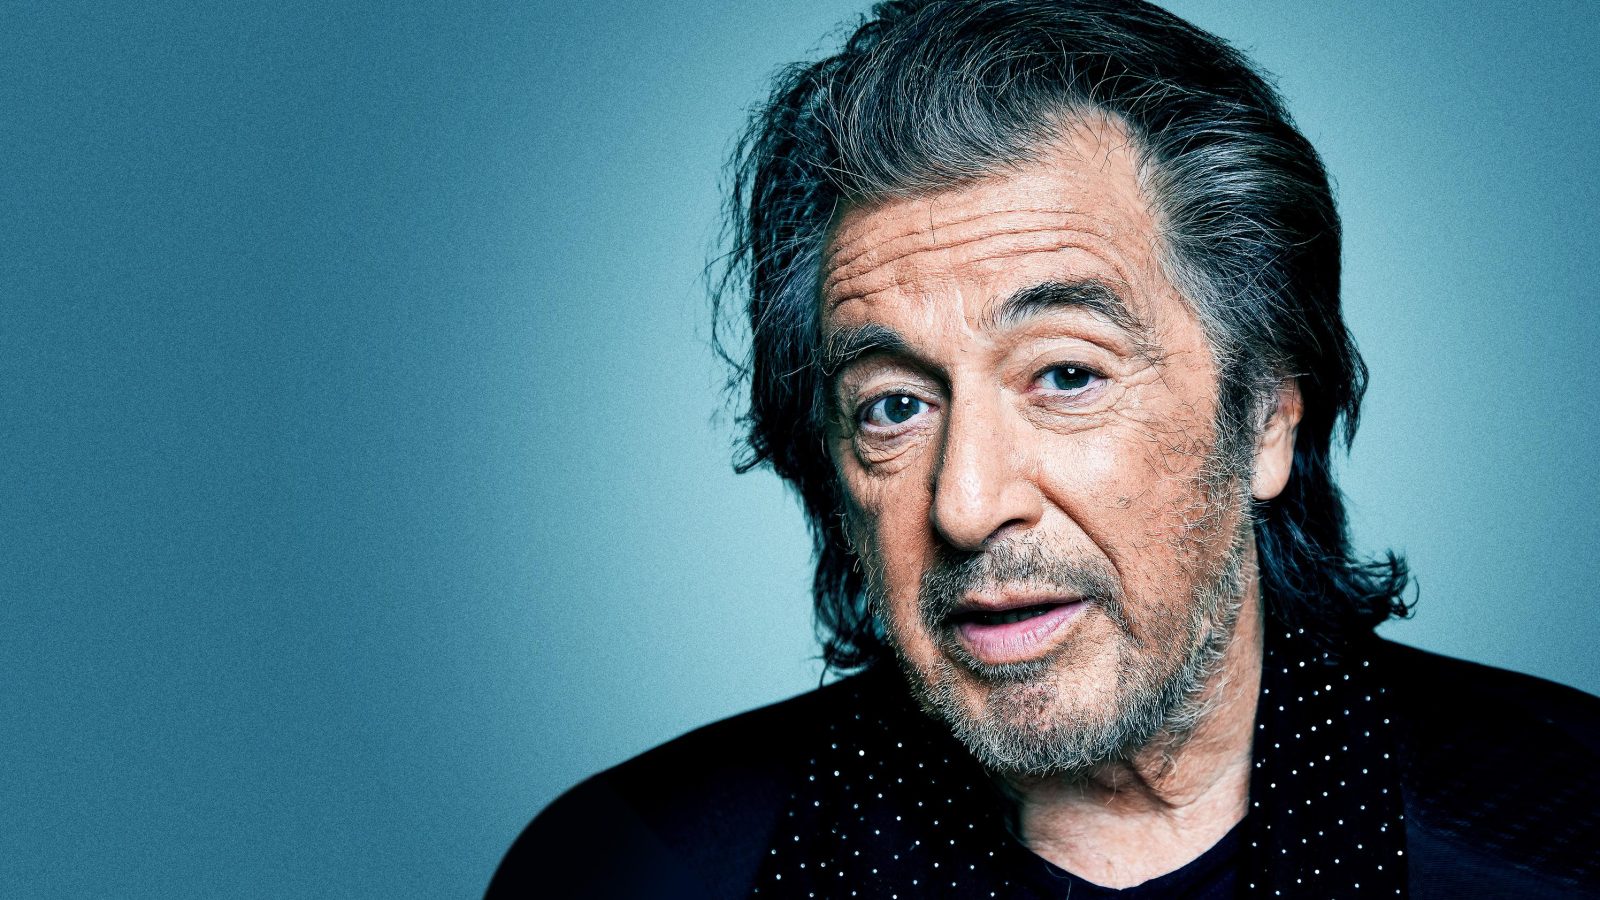 Al Pacino Biography Height Weight Age Movies Wife Family Salary Net Worth Facts More